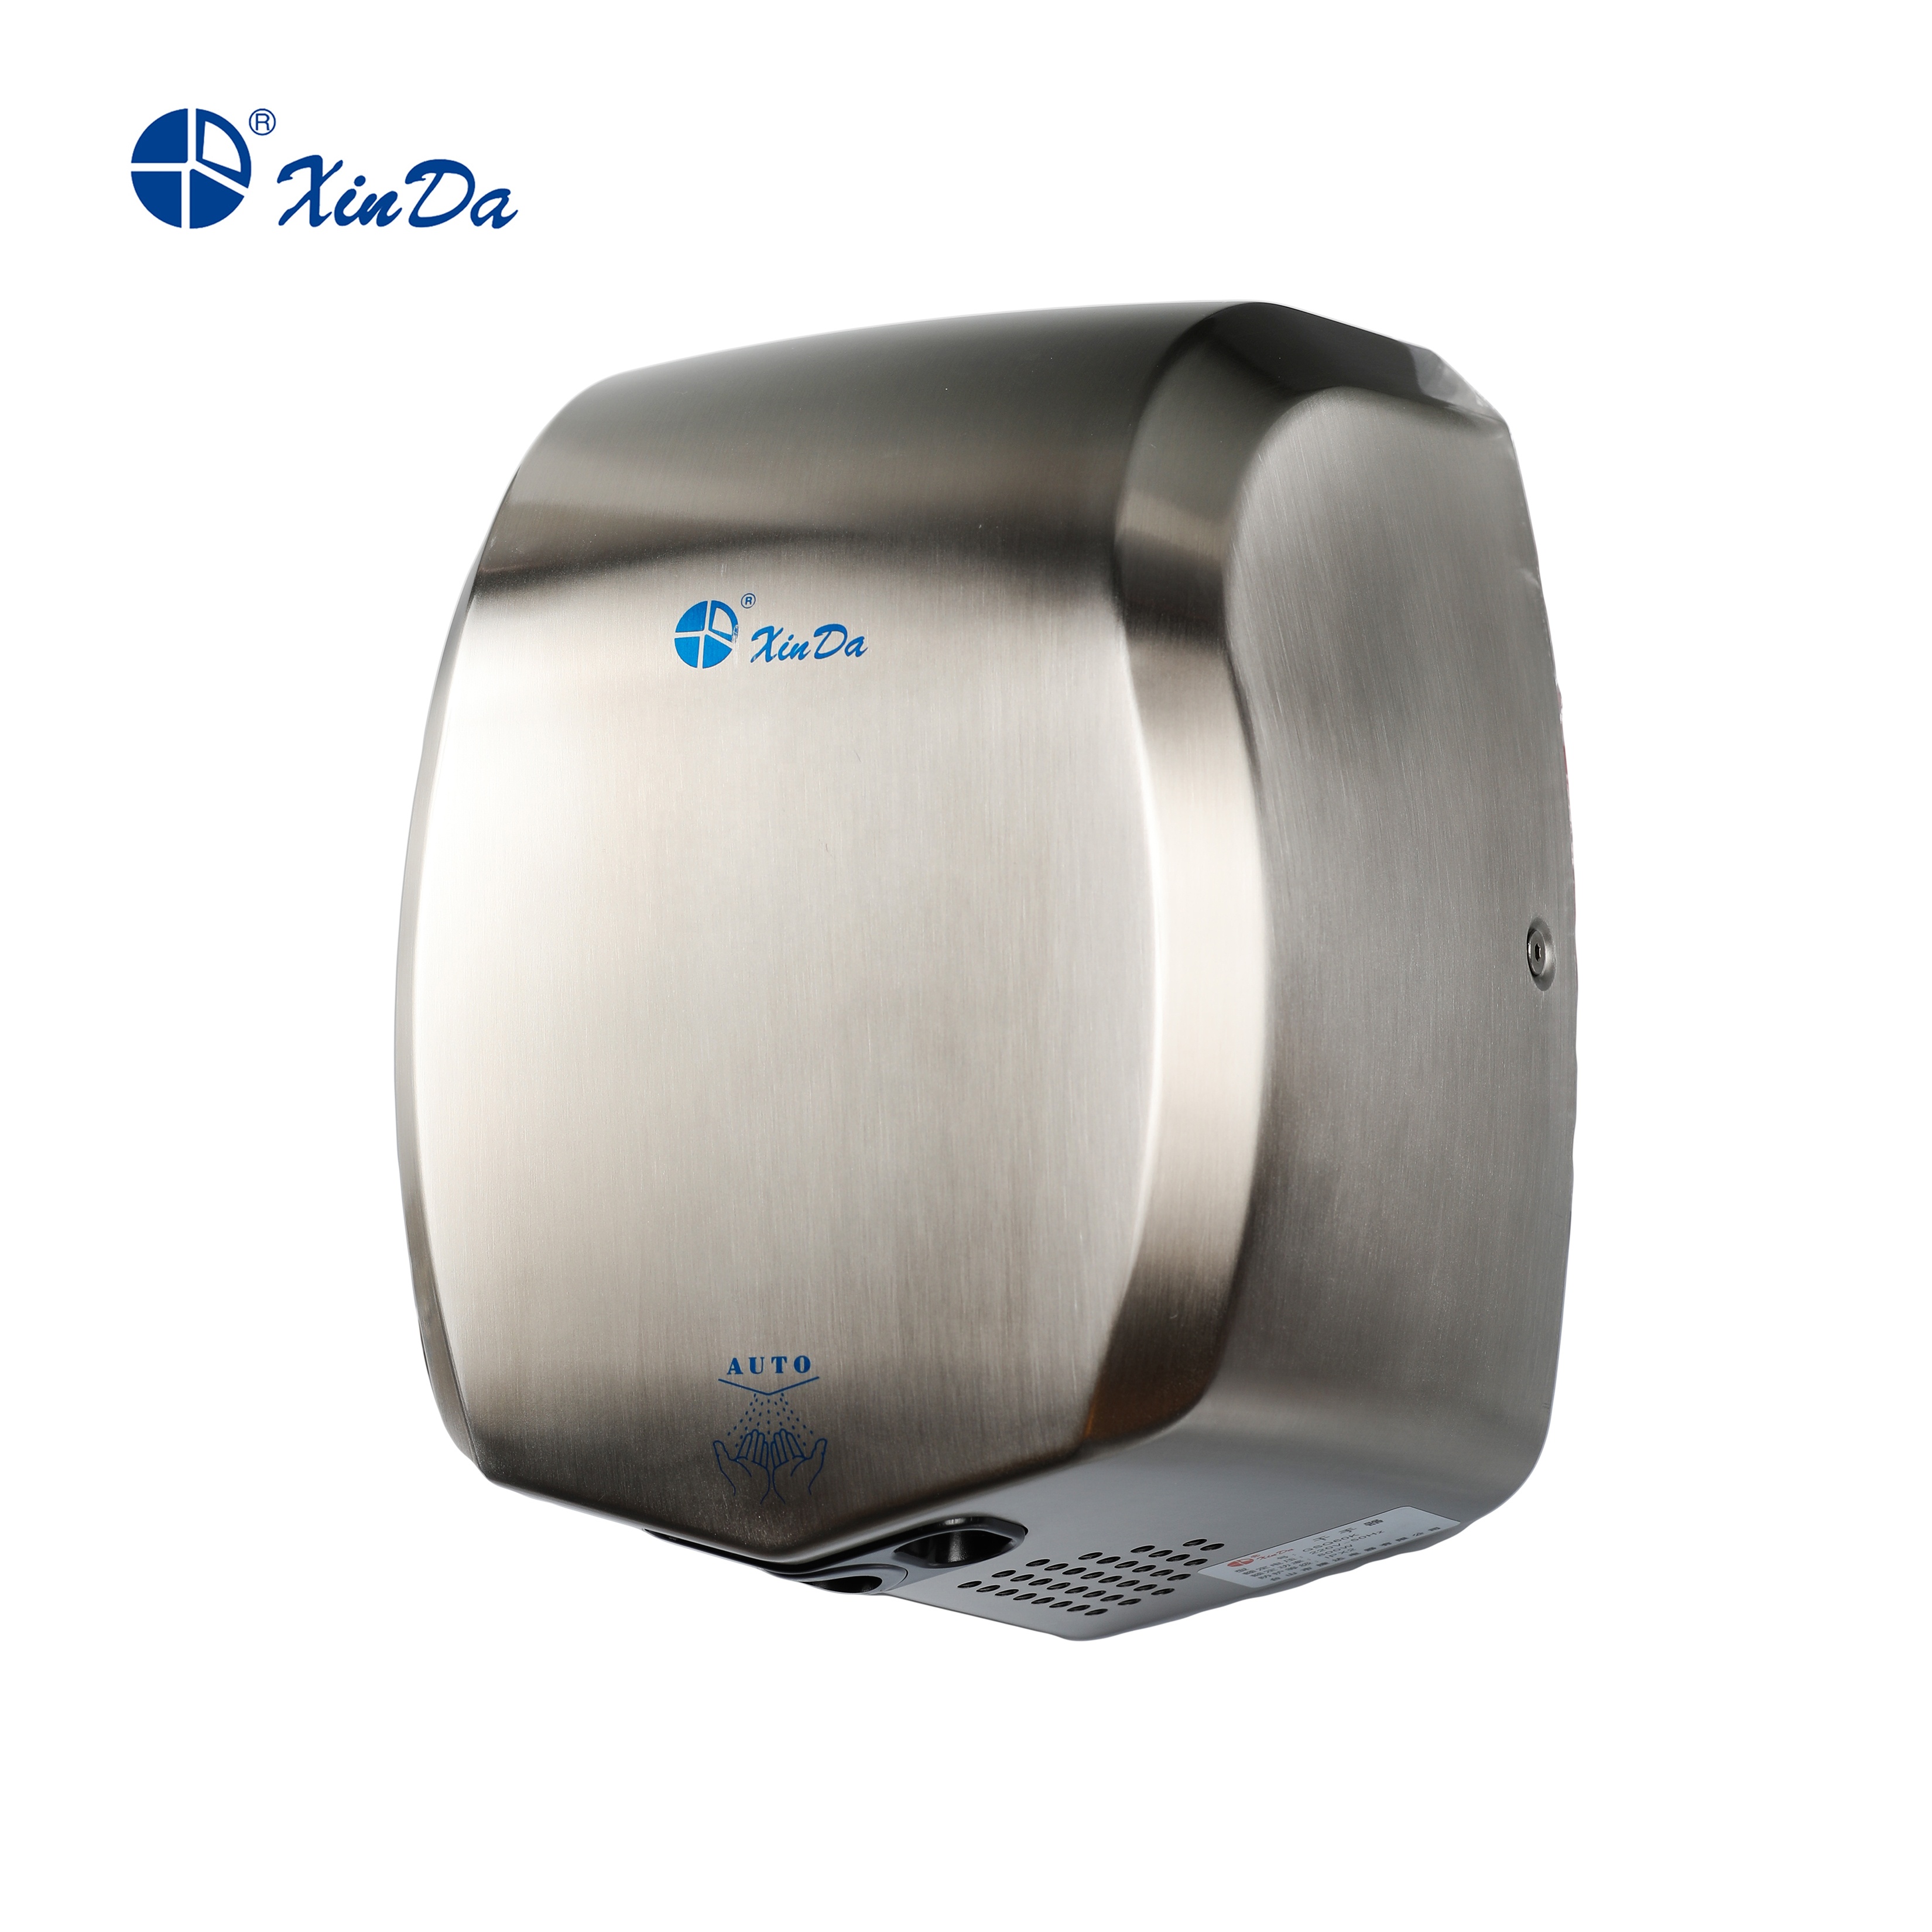 Professional Stainless Steel Automatic Infrared Sensor Wall Mounted Hand Dryer